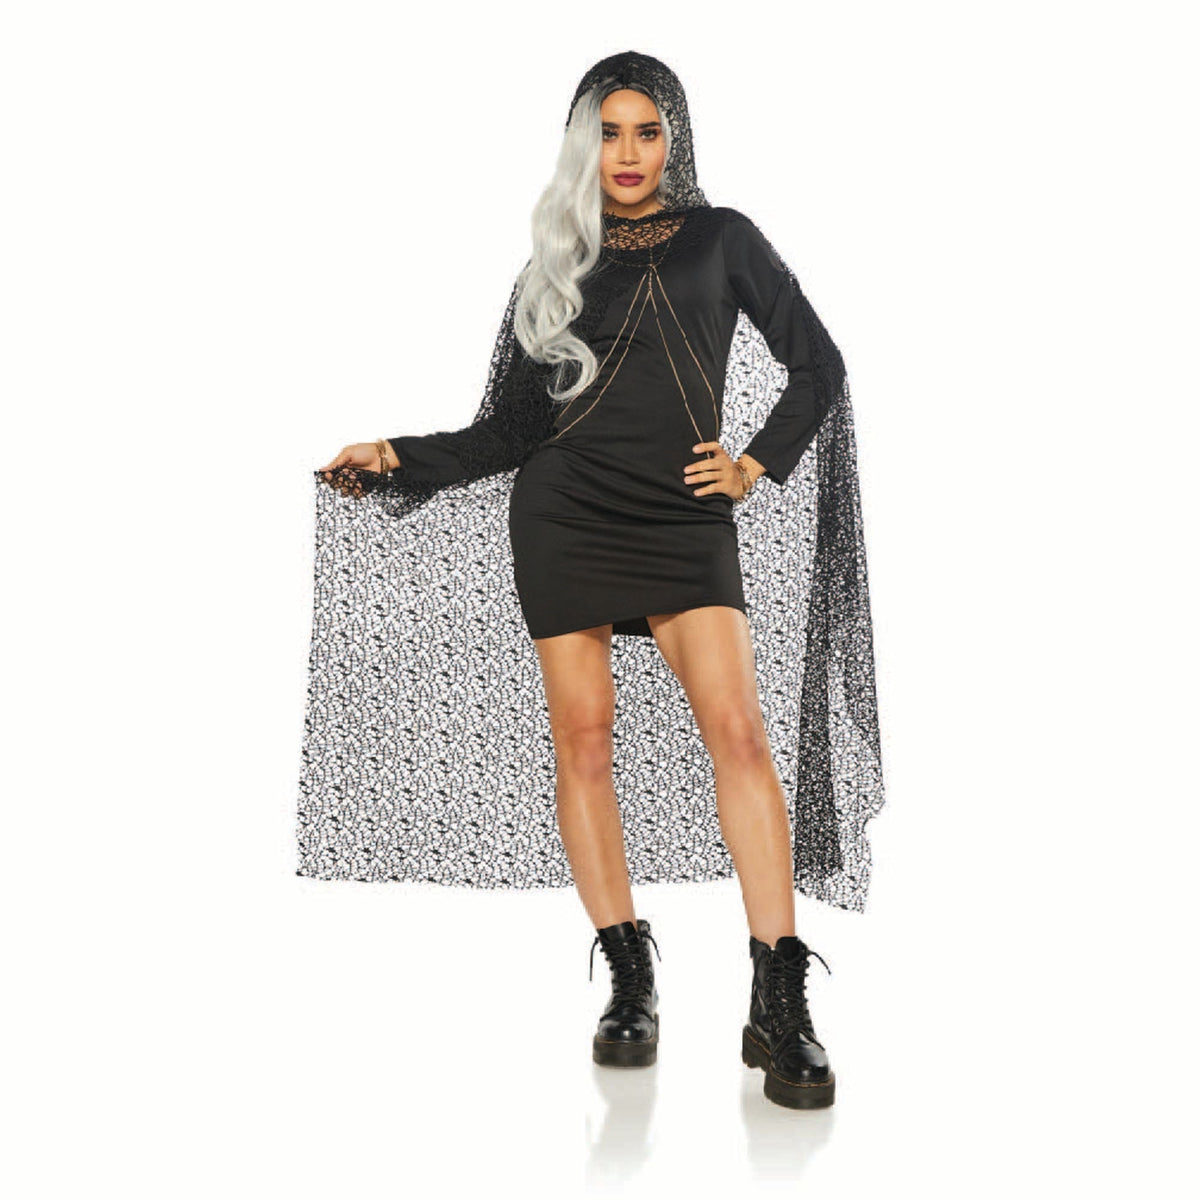 Seeing Red Inc. Costumes Accessories Black Witch Cape for Adults